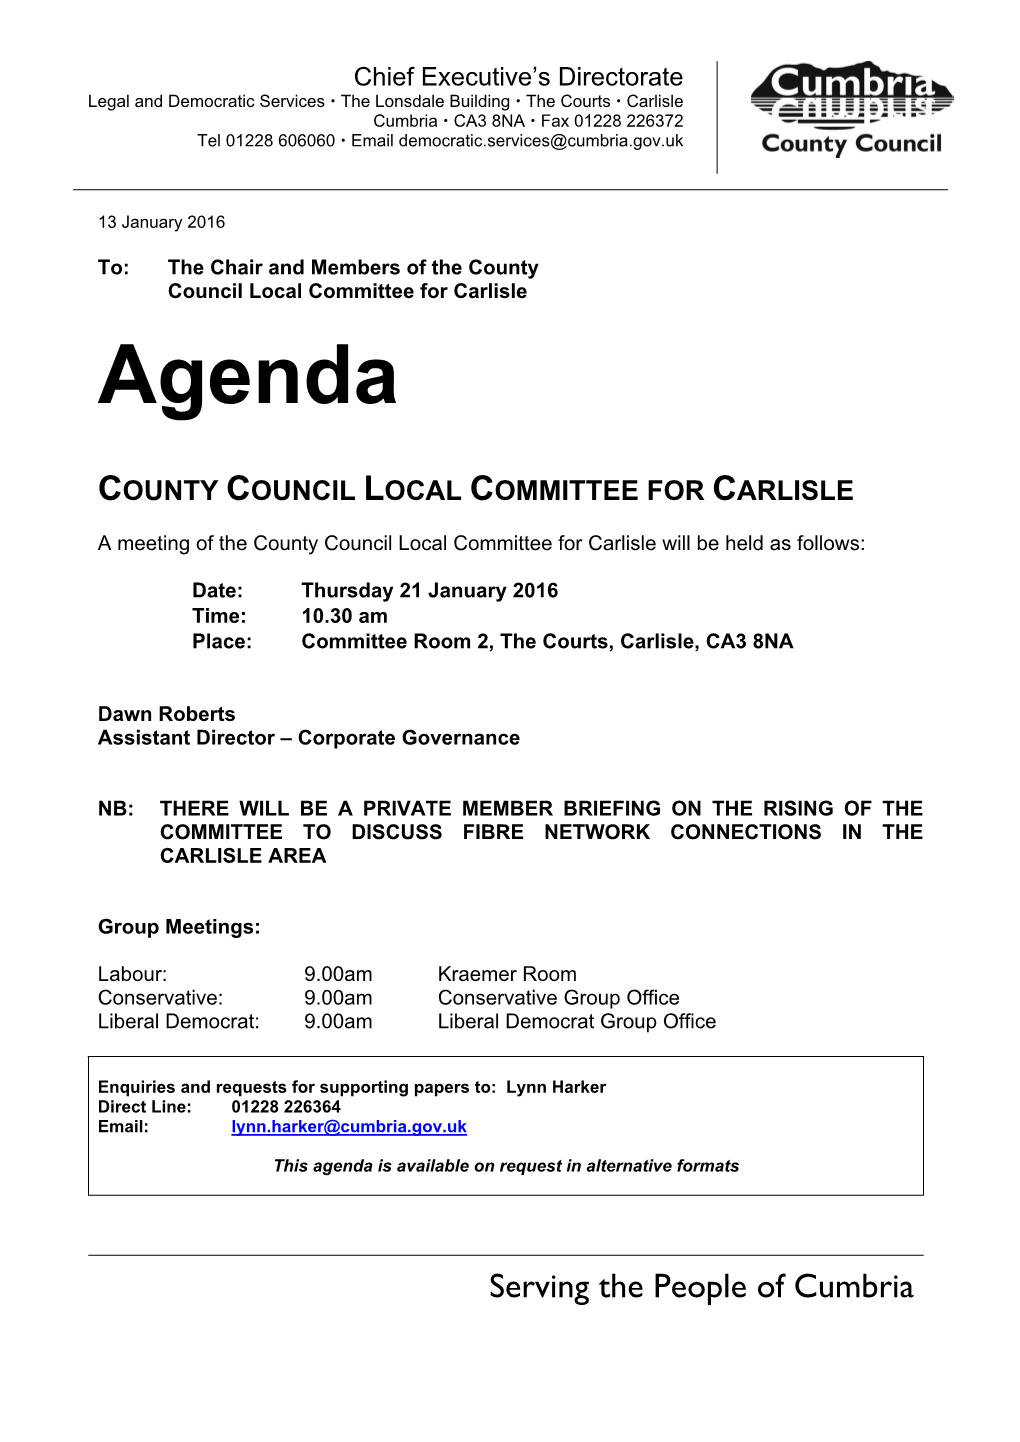 Agenda Document for County Council Local Committee for Carlisle, 21/01